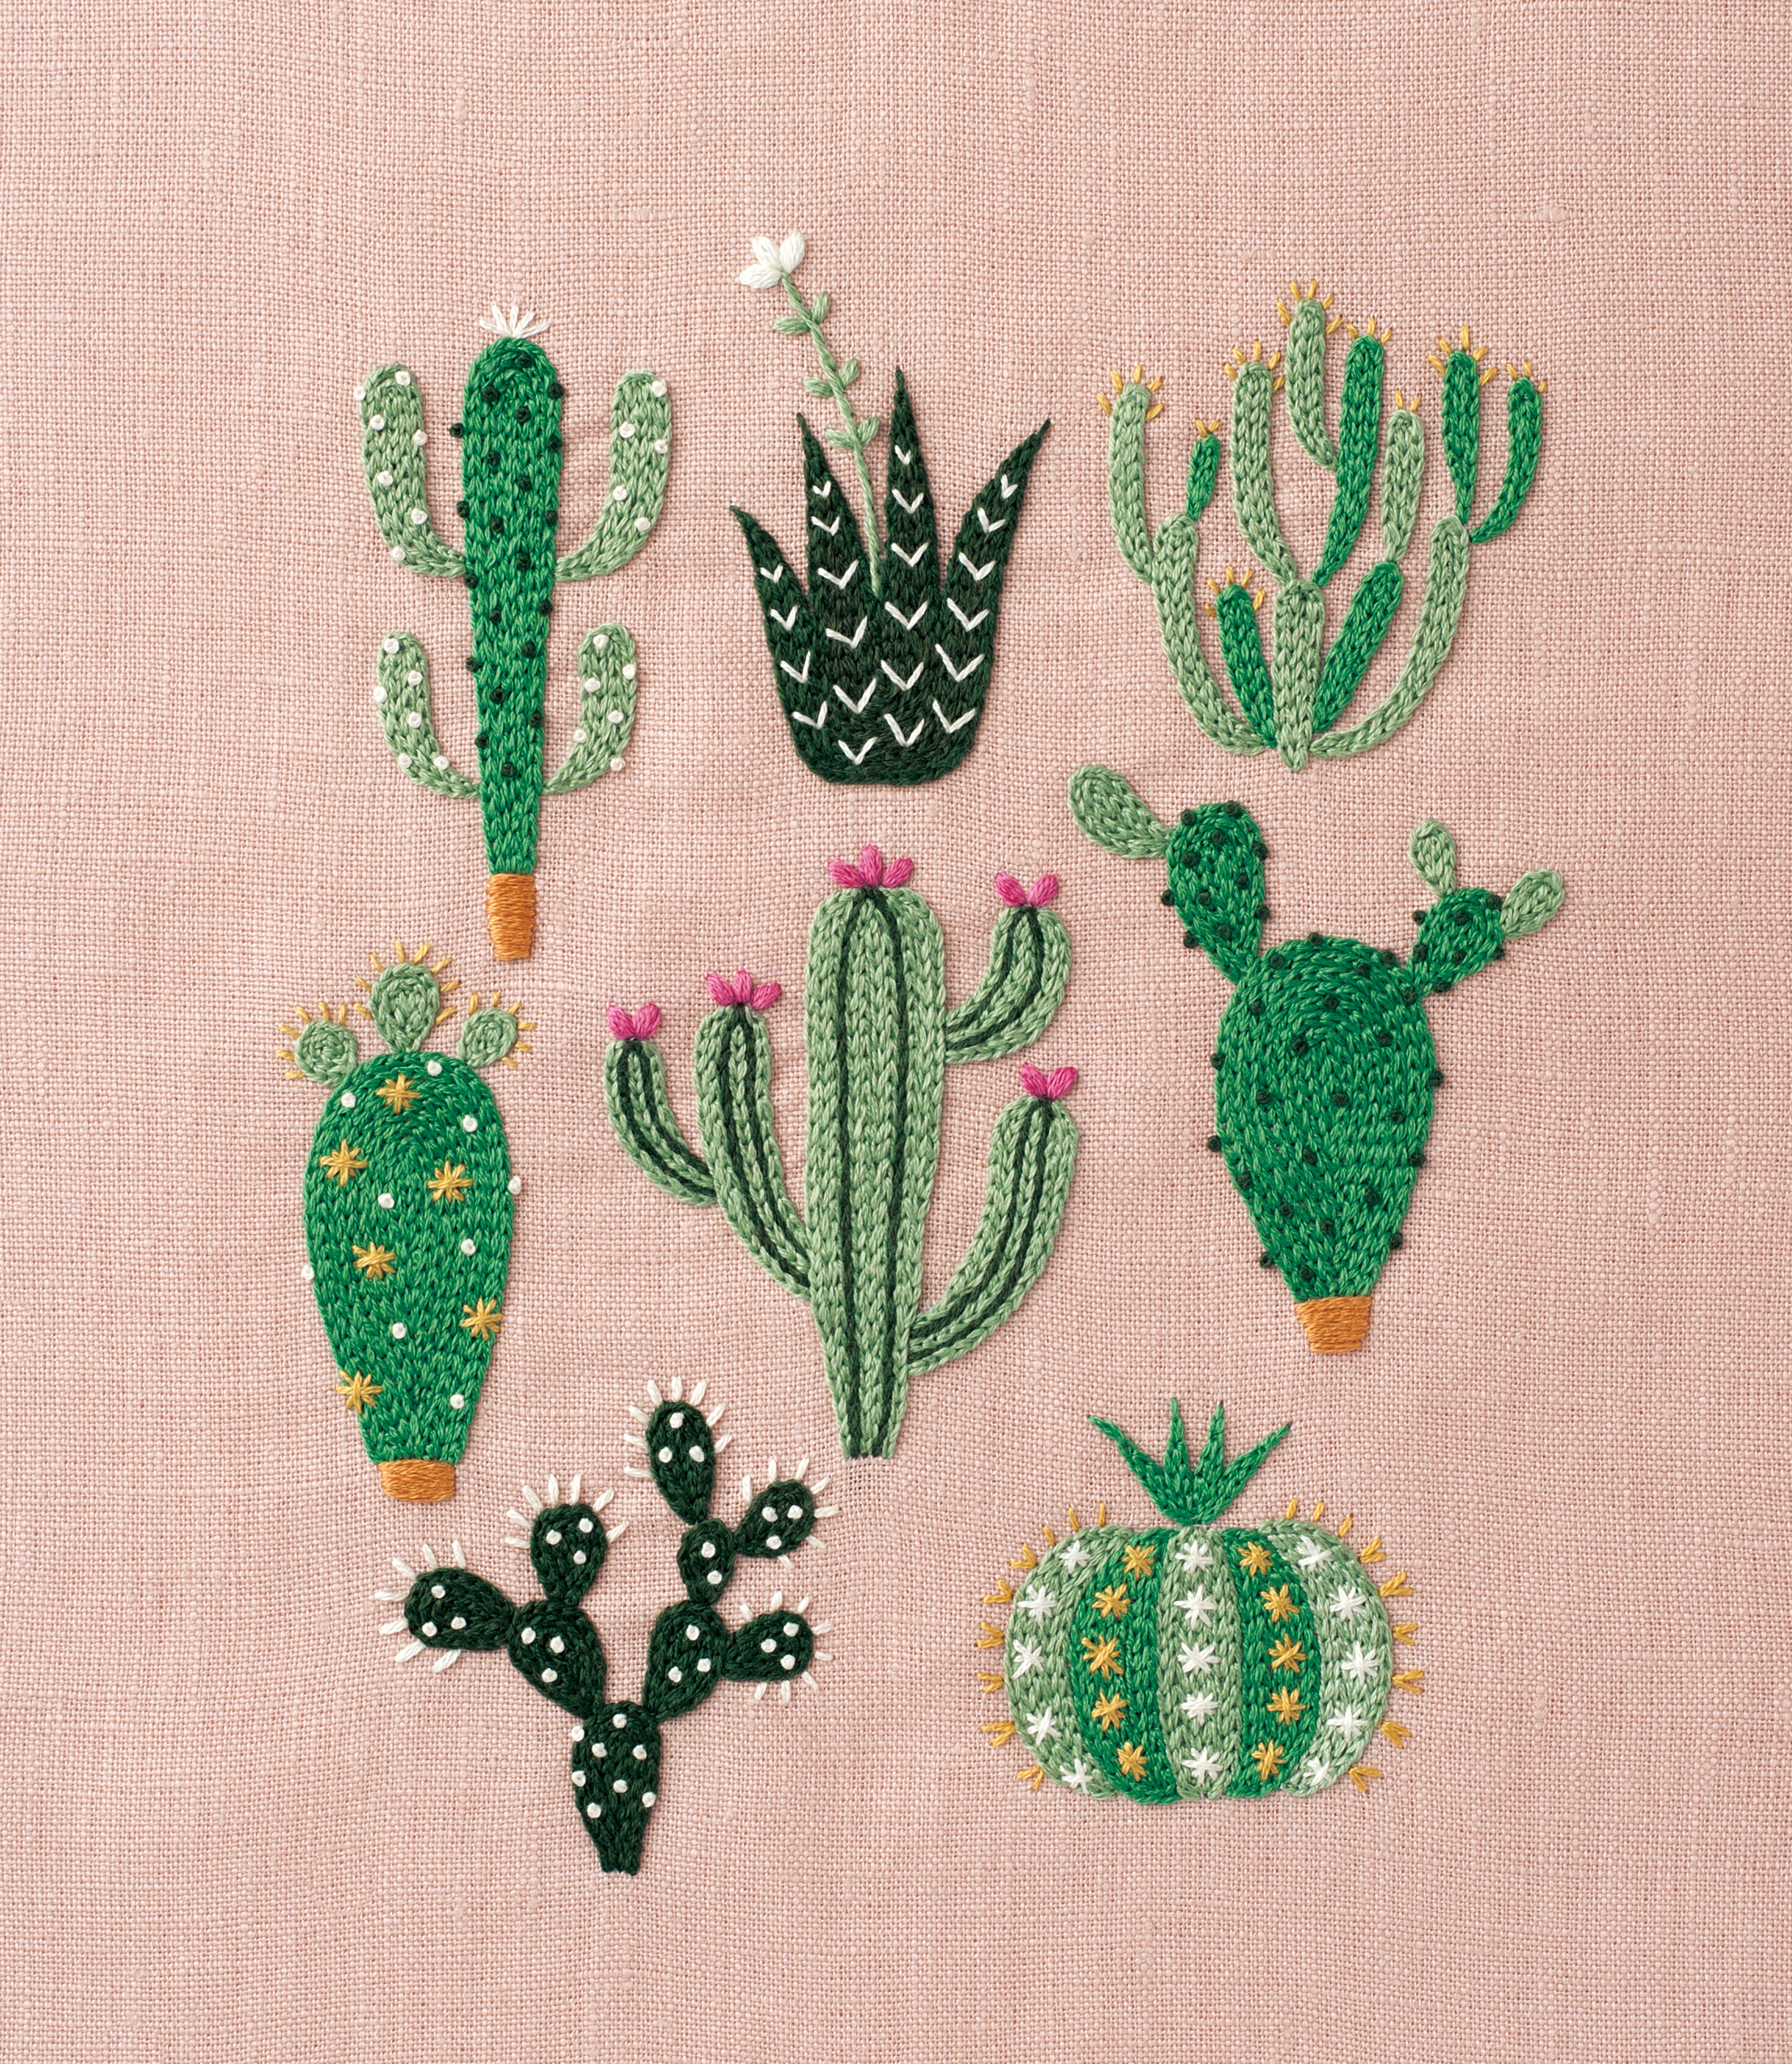 Cool Embroidery Patterns Diy Floral Cactus Embroidery Projects From A Year Of Embroidery